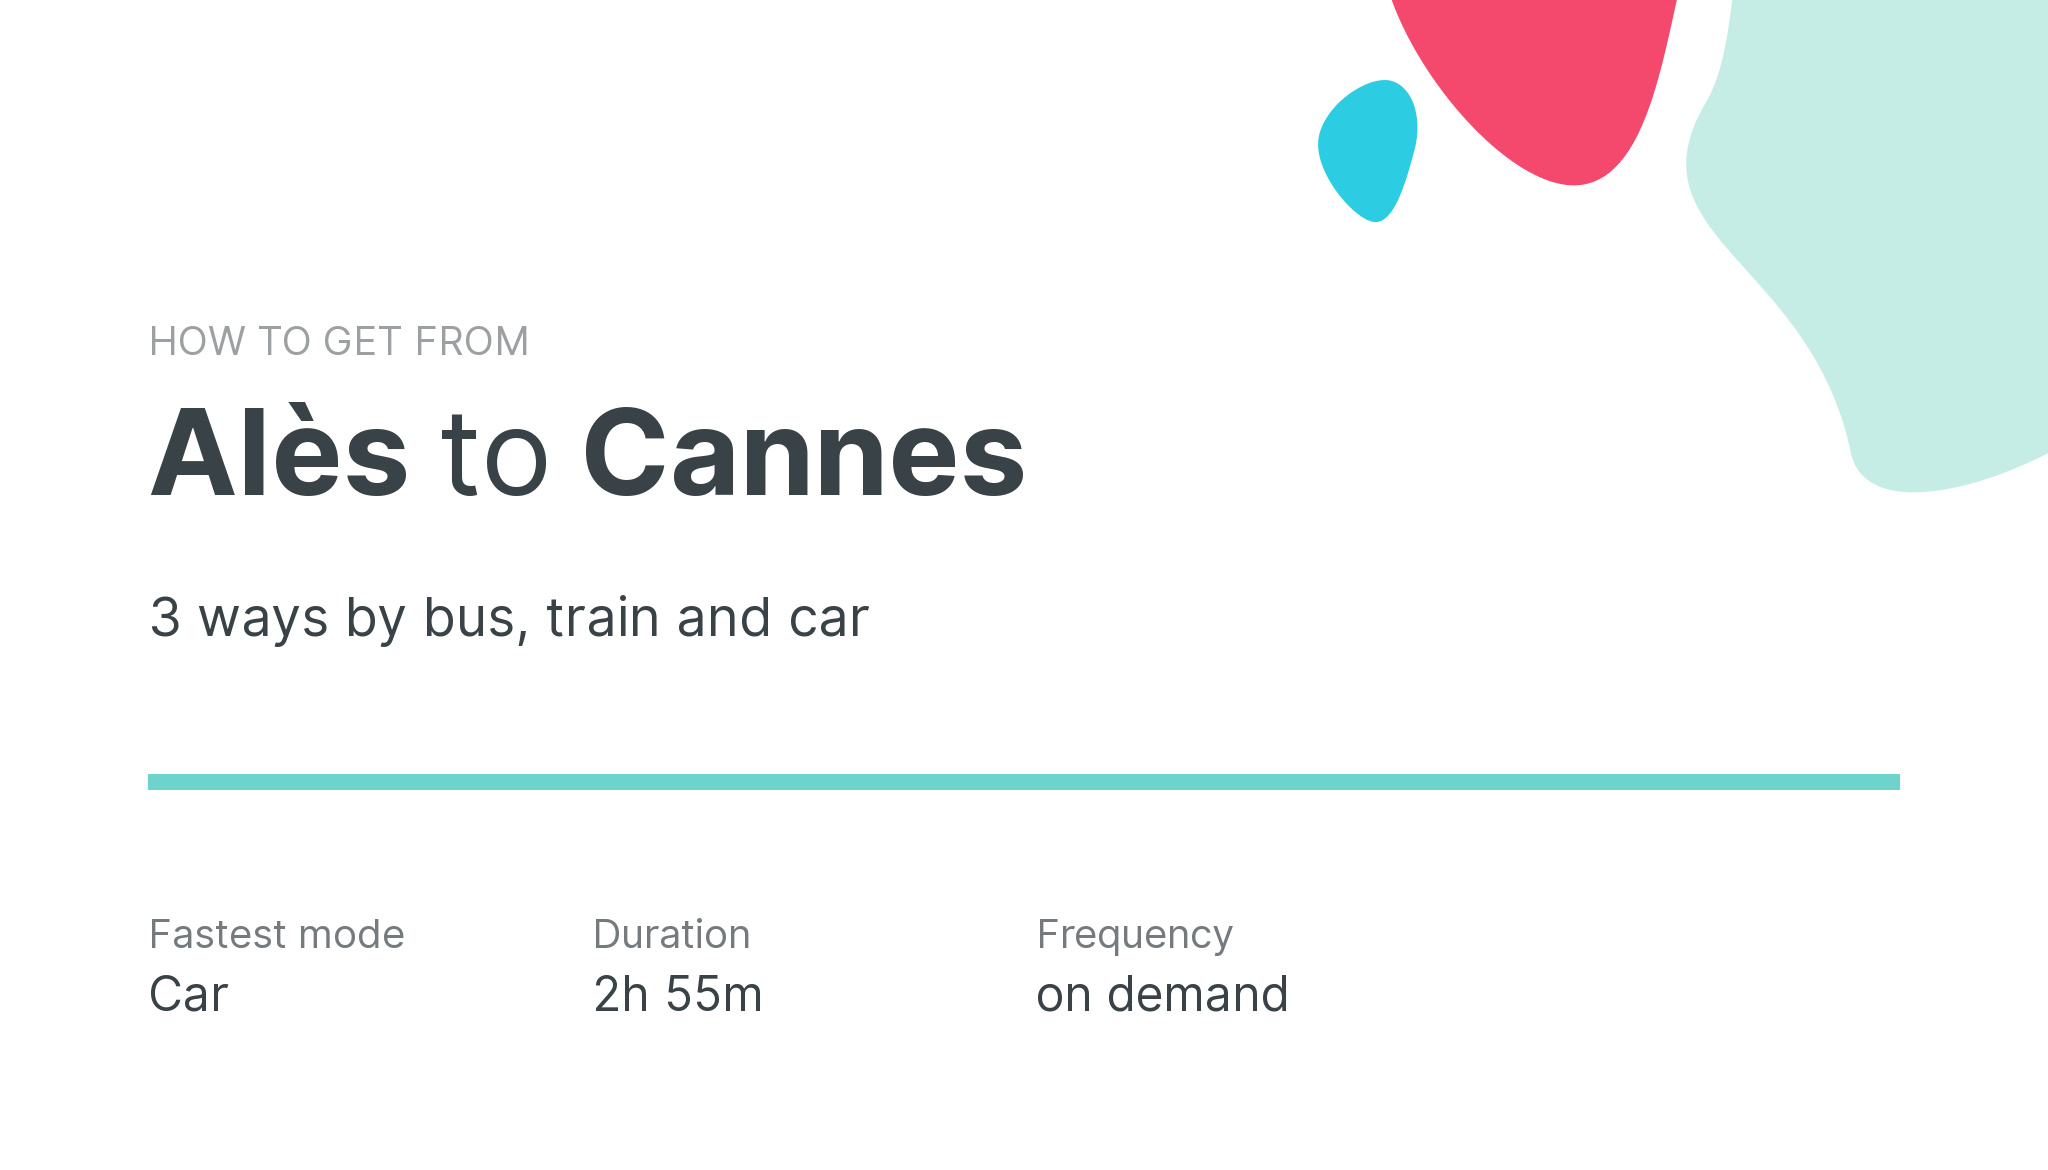 How do I get from Alès to Cannes